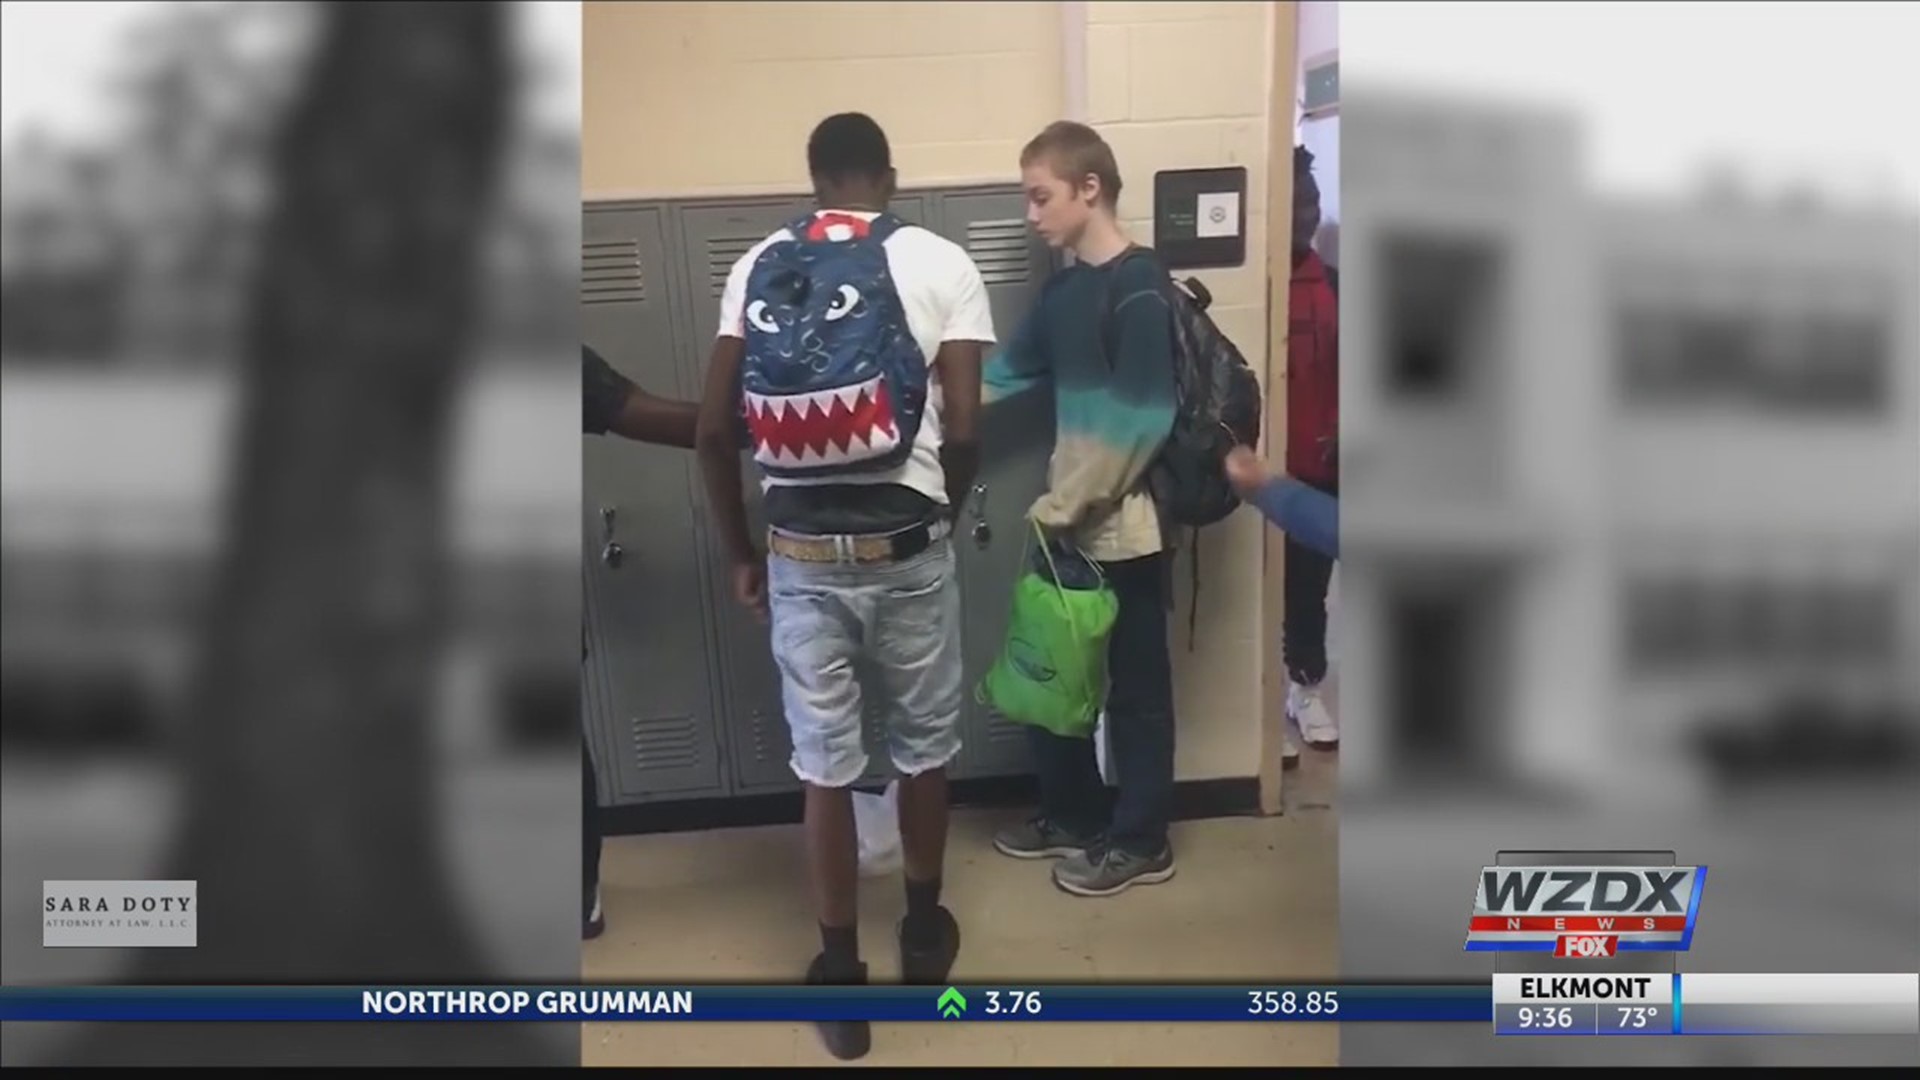 A heart-warming story out of Memphis, where two high school students stepped-up to help a freshman who was being bullied over his clothes.